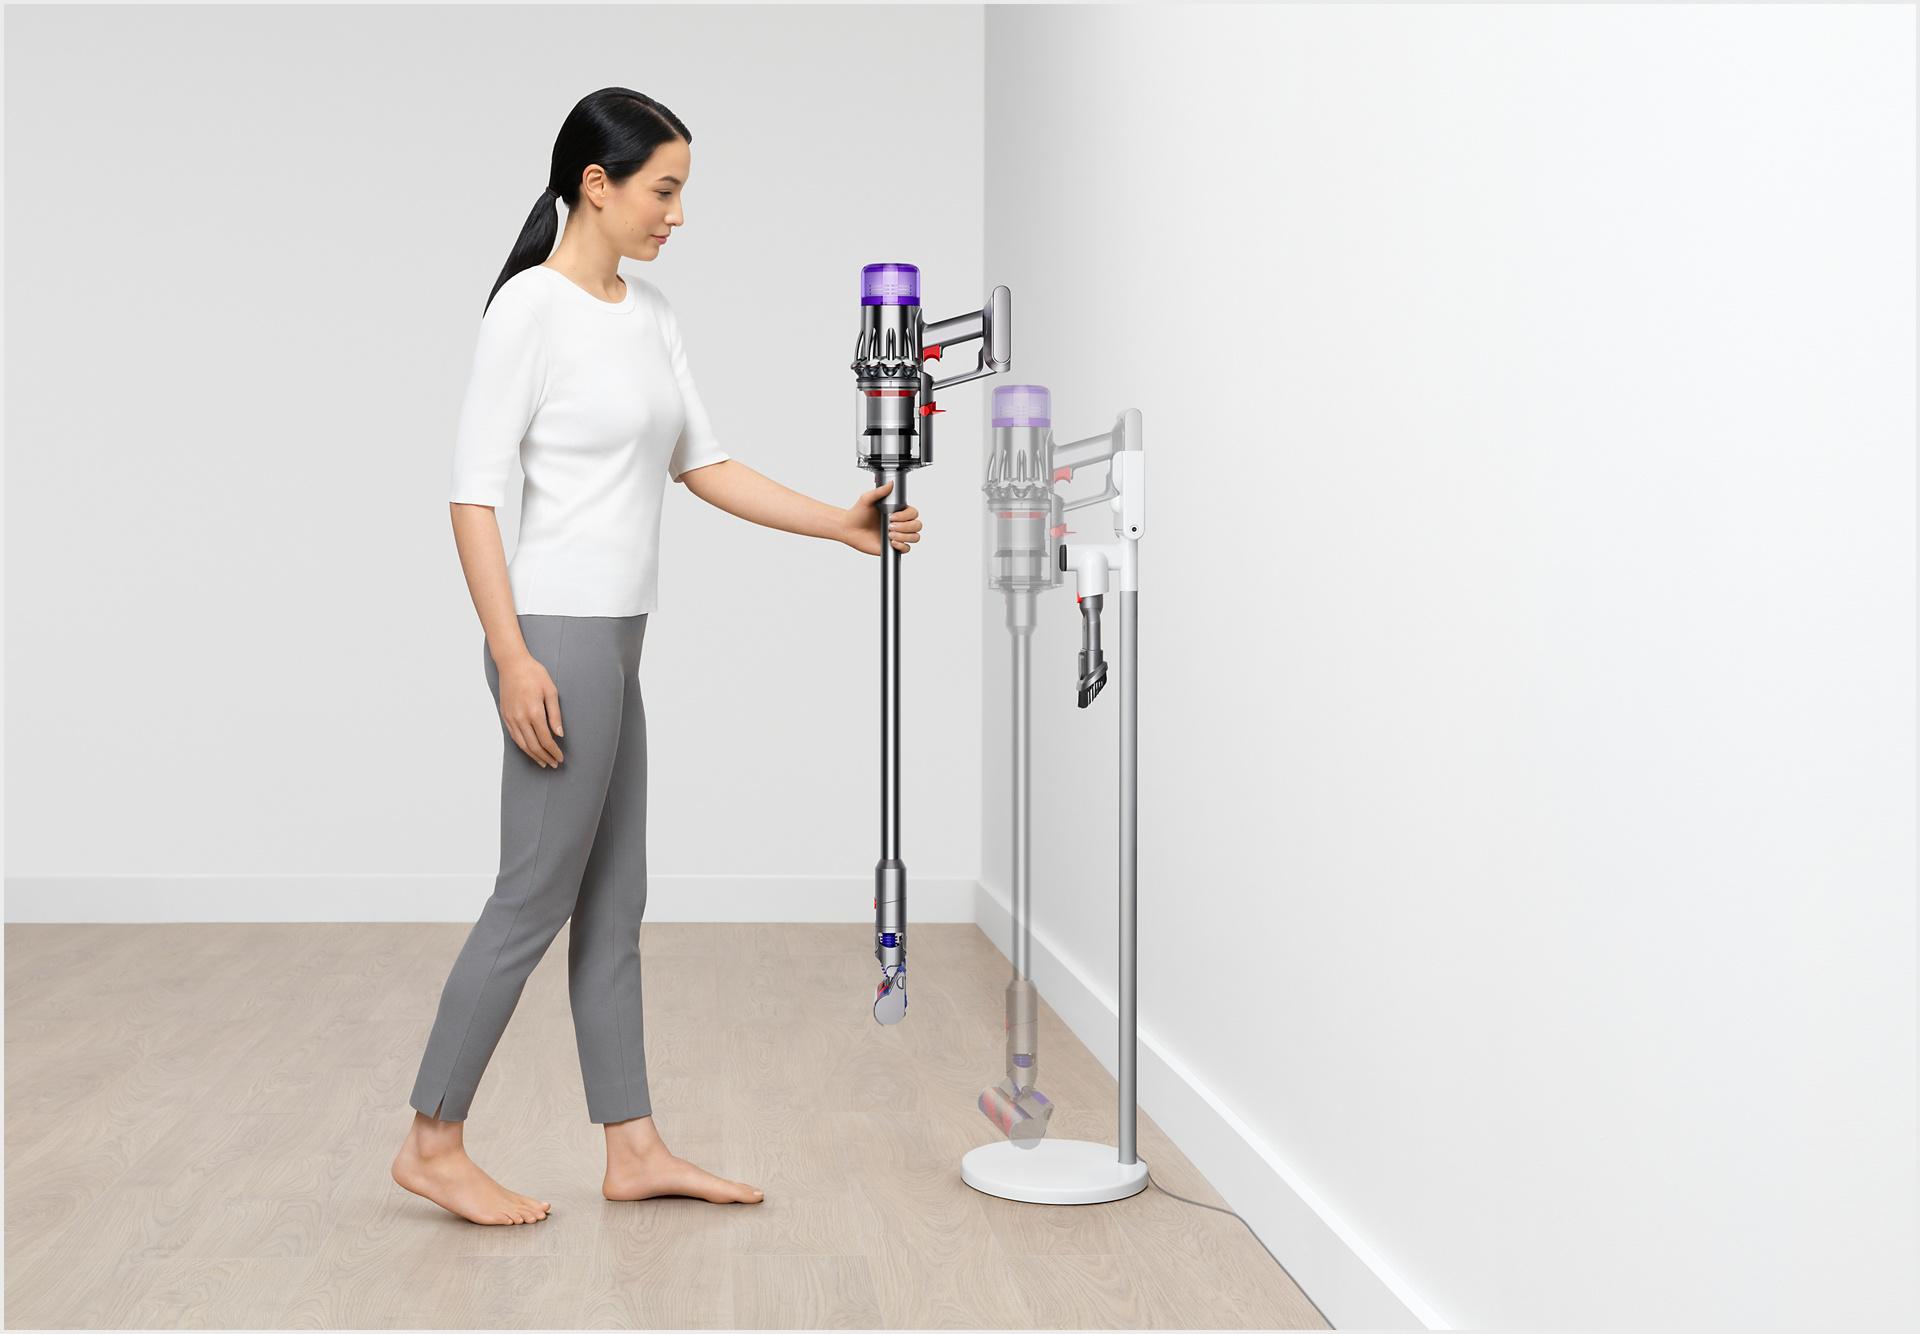 Dyson Digital Slim™ vacuum being placed into Grab and Go Floor dock.